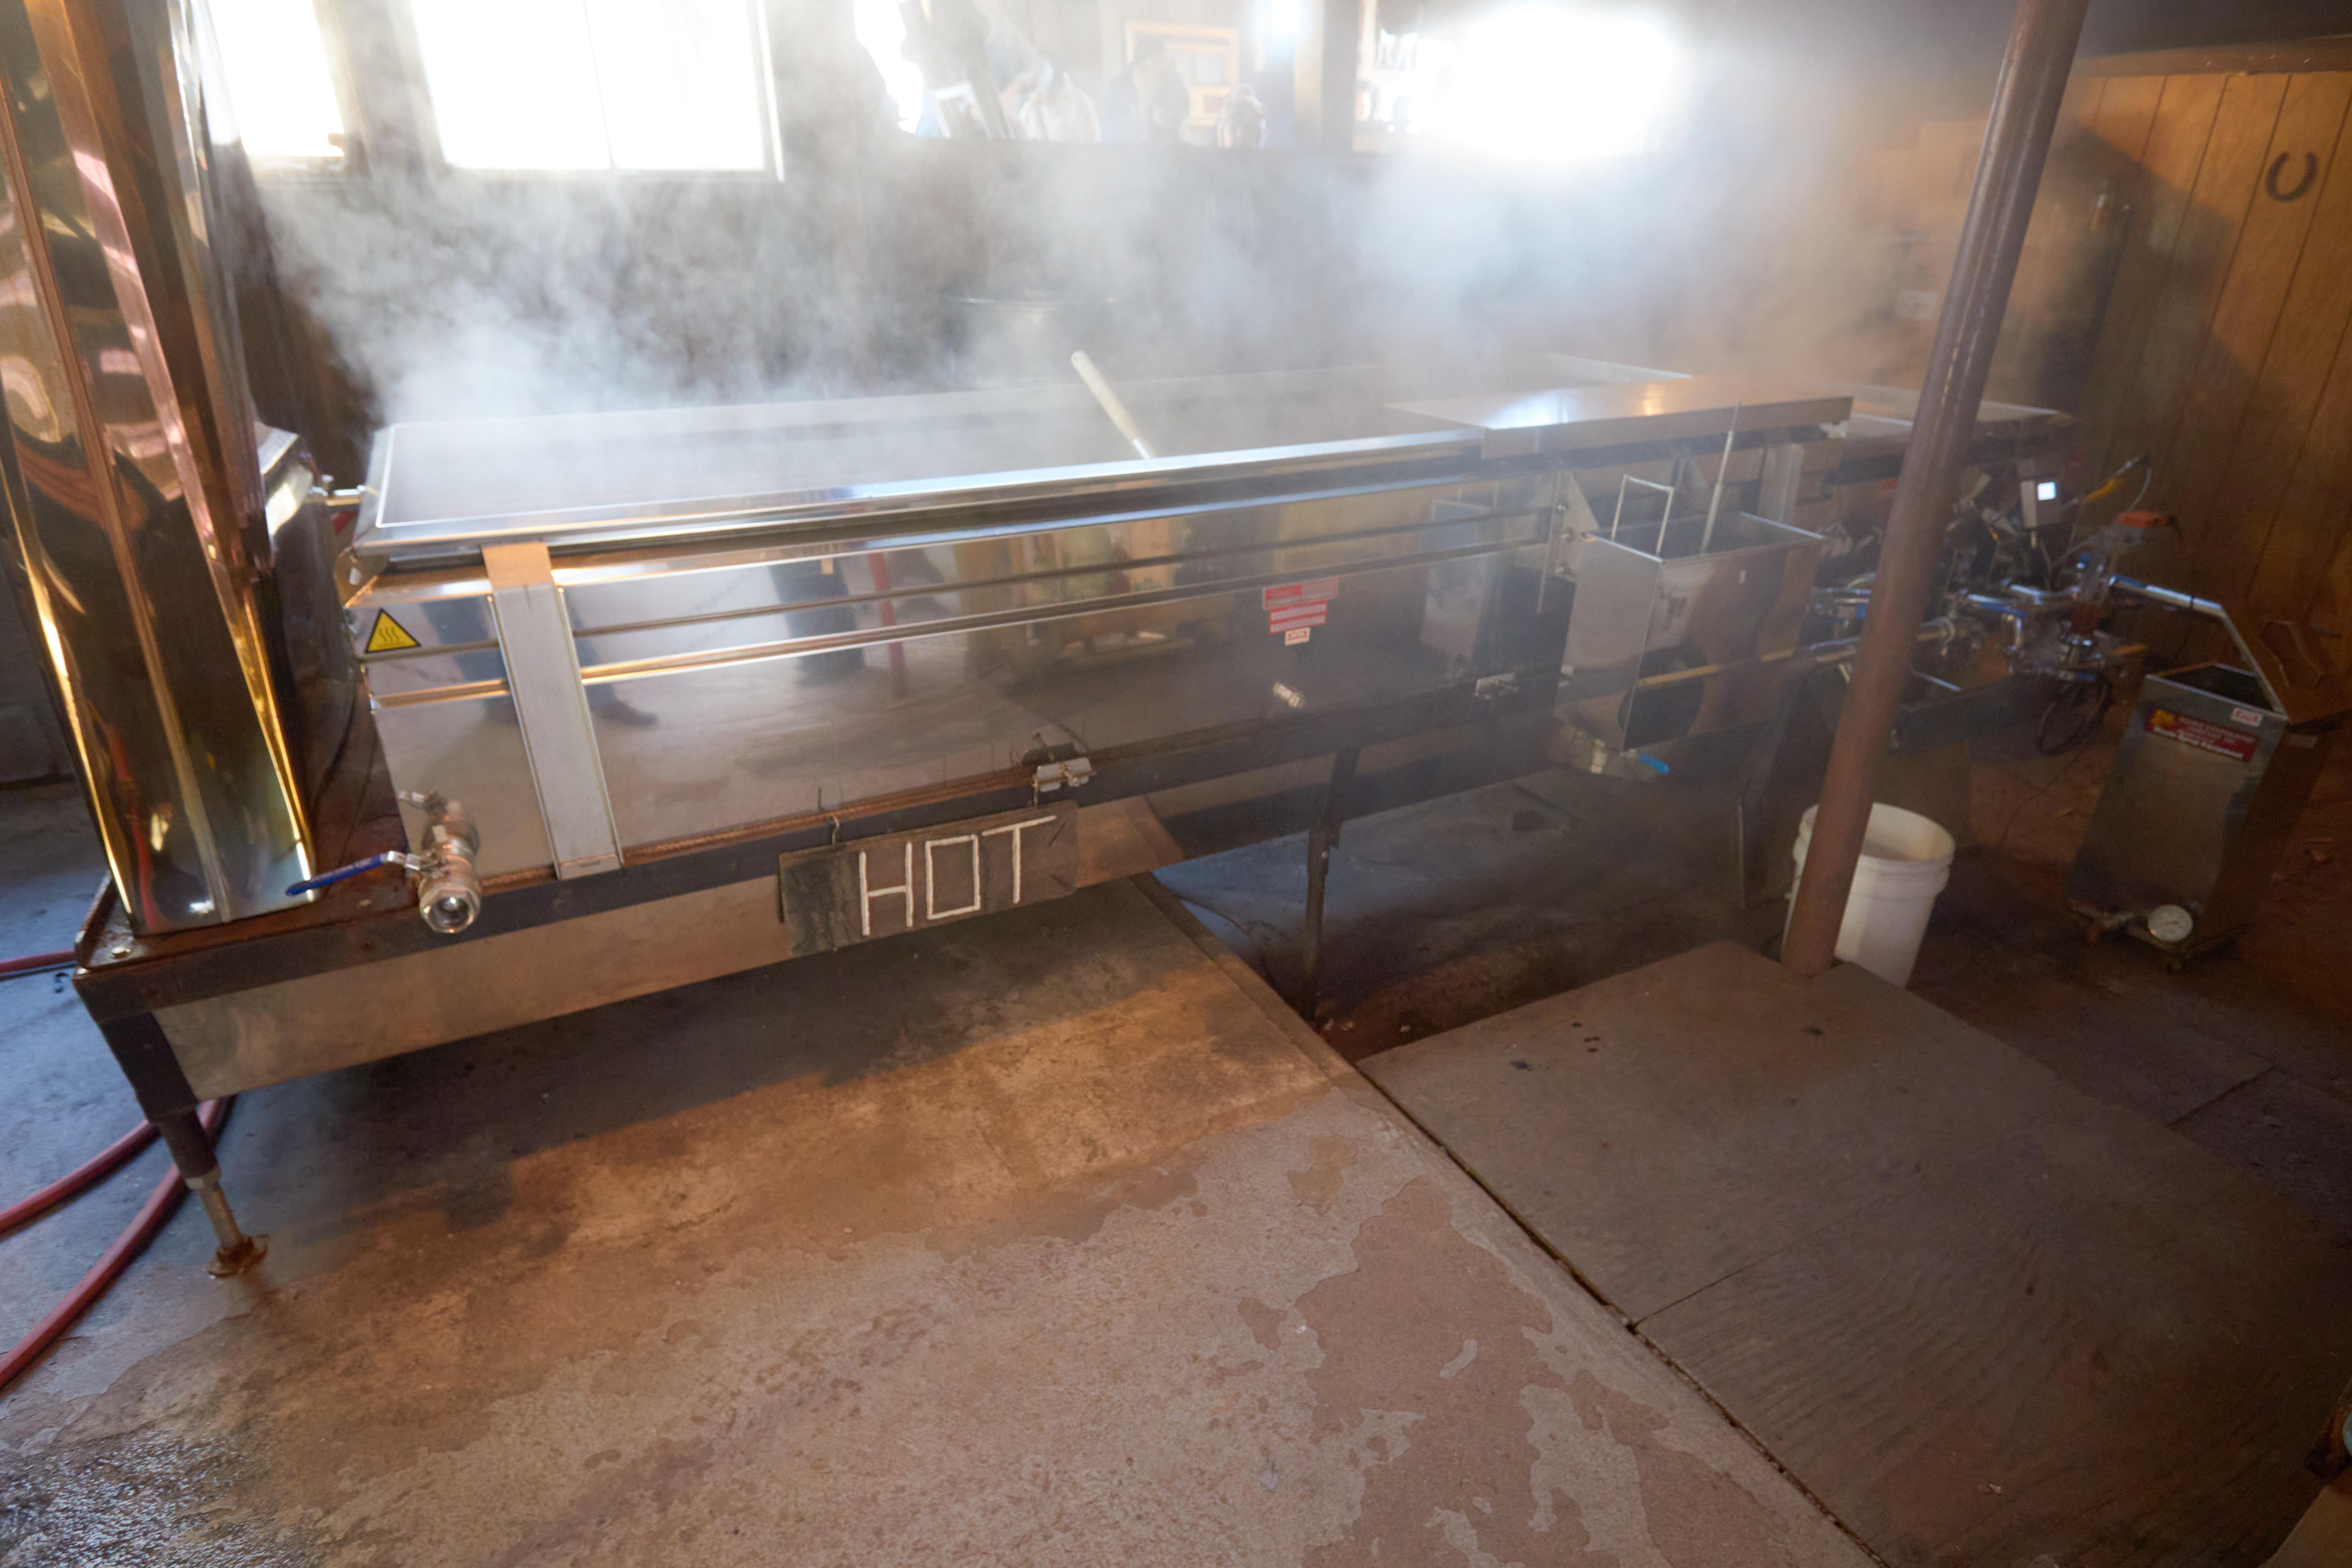 Maple syrup evaporator, with steam rising from top.